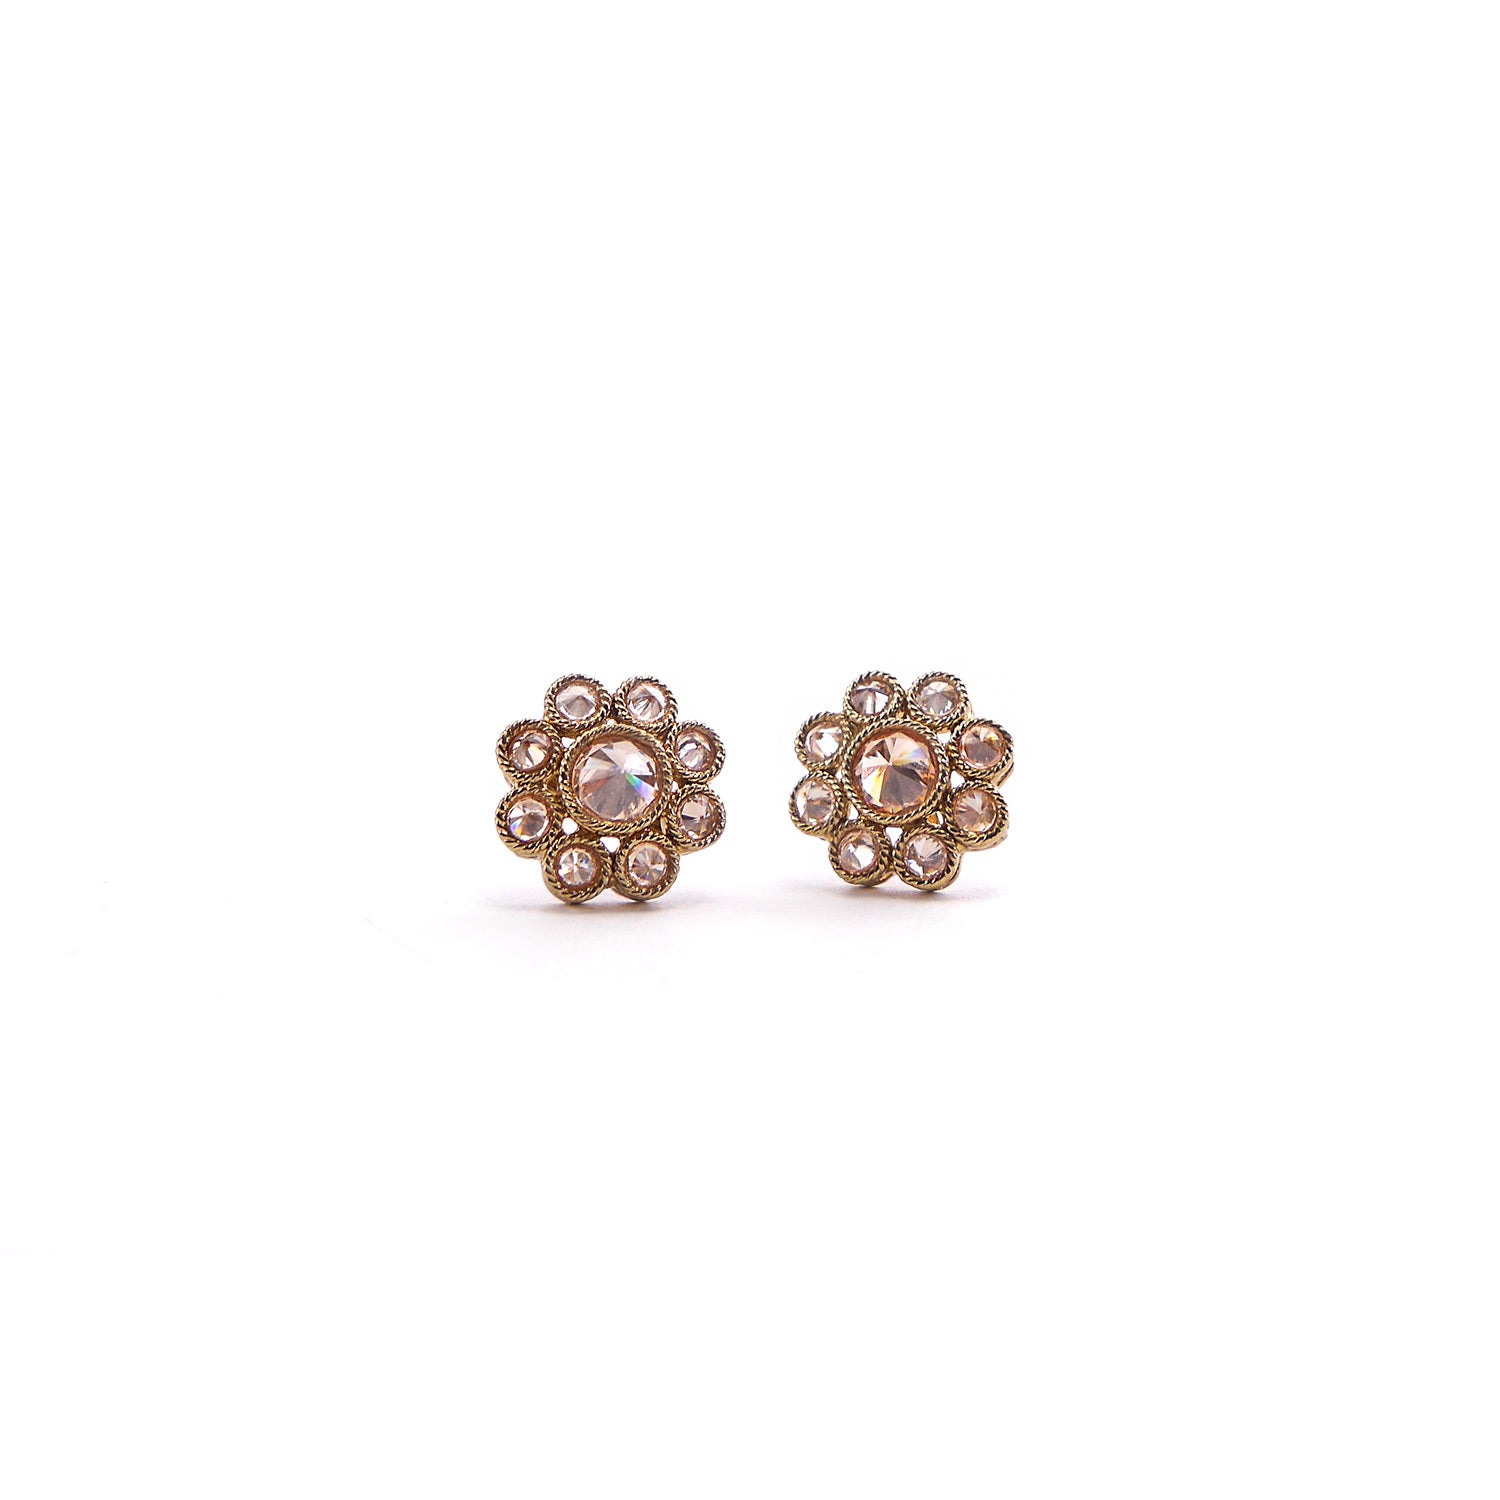 Daisy Studs in Antique Gold